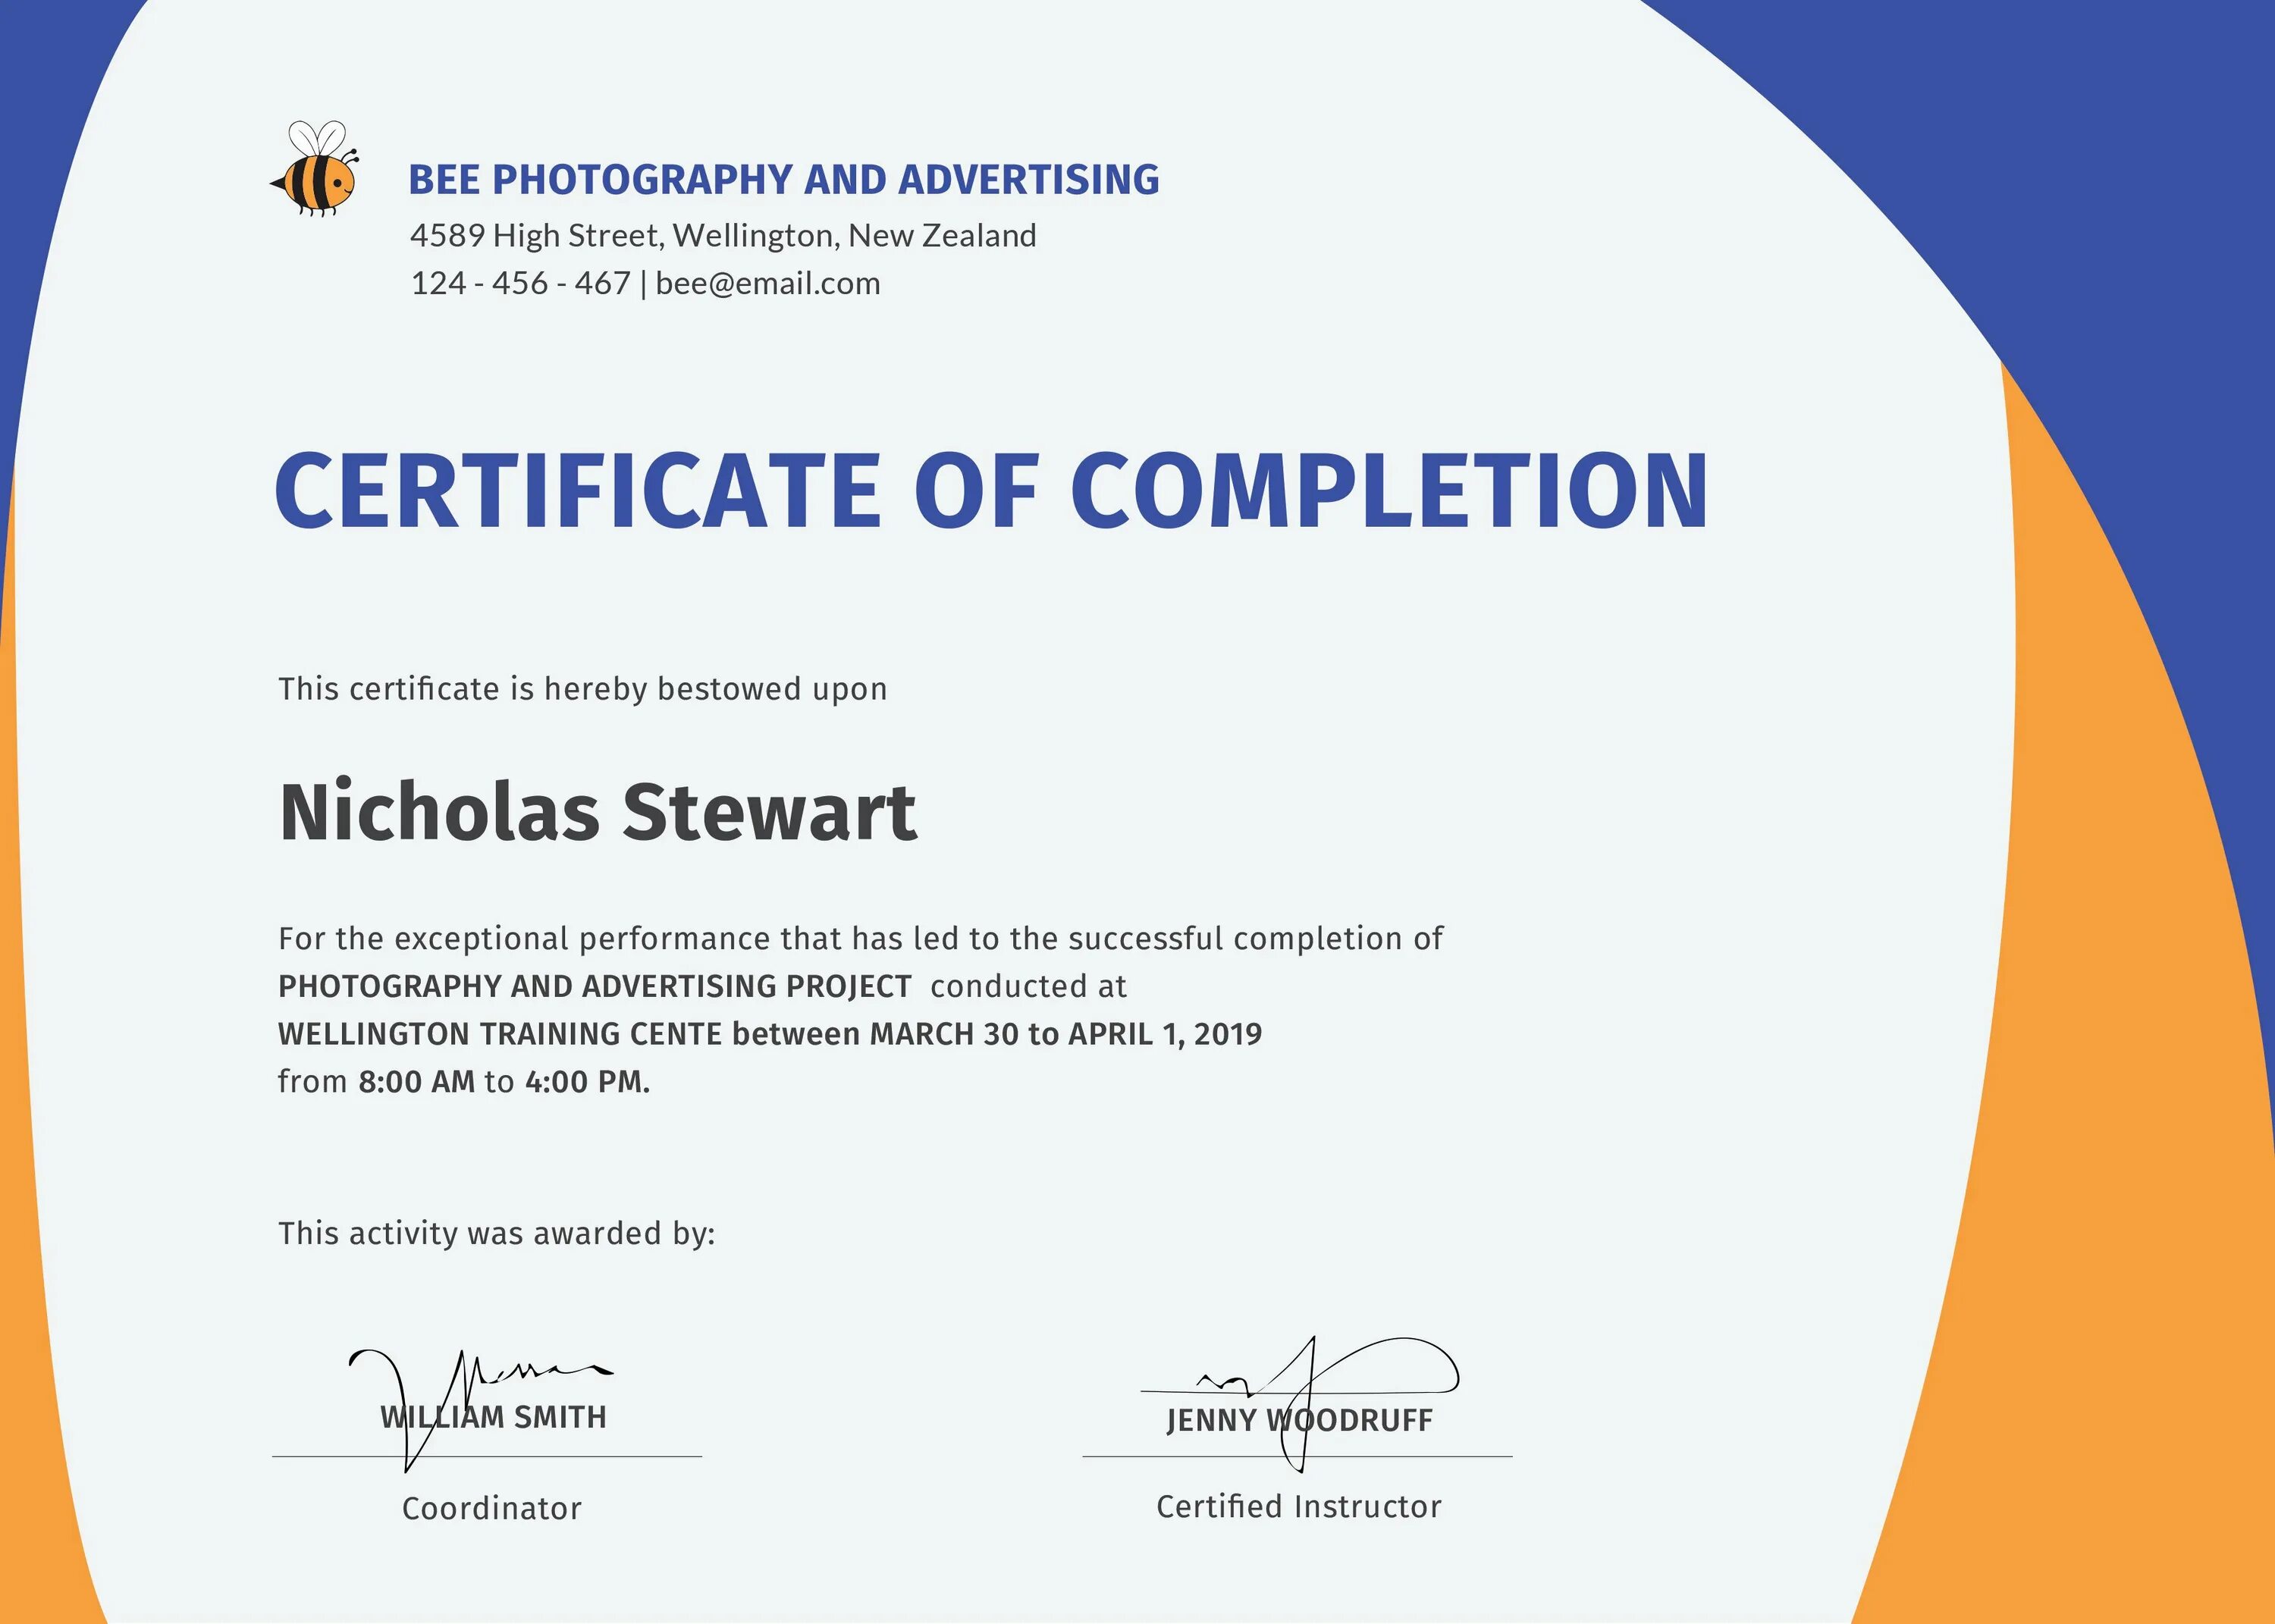 Certificate of completion. Сертификат of completion. Certificate of completion of the course. Certificate of completion Template.